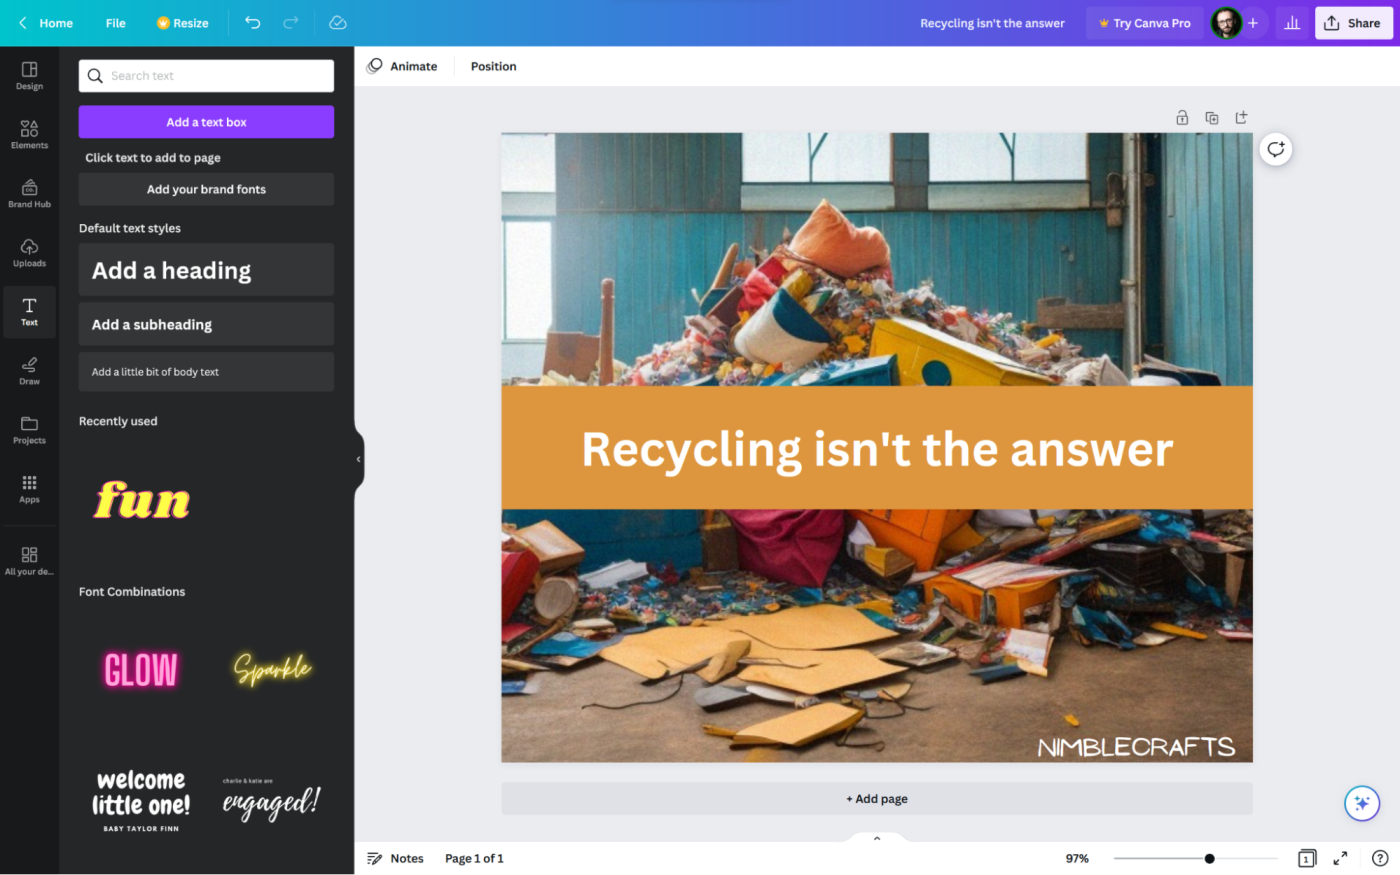 The image in Canva, with the phrase "Recycling isn't the answer" over it.